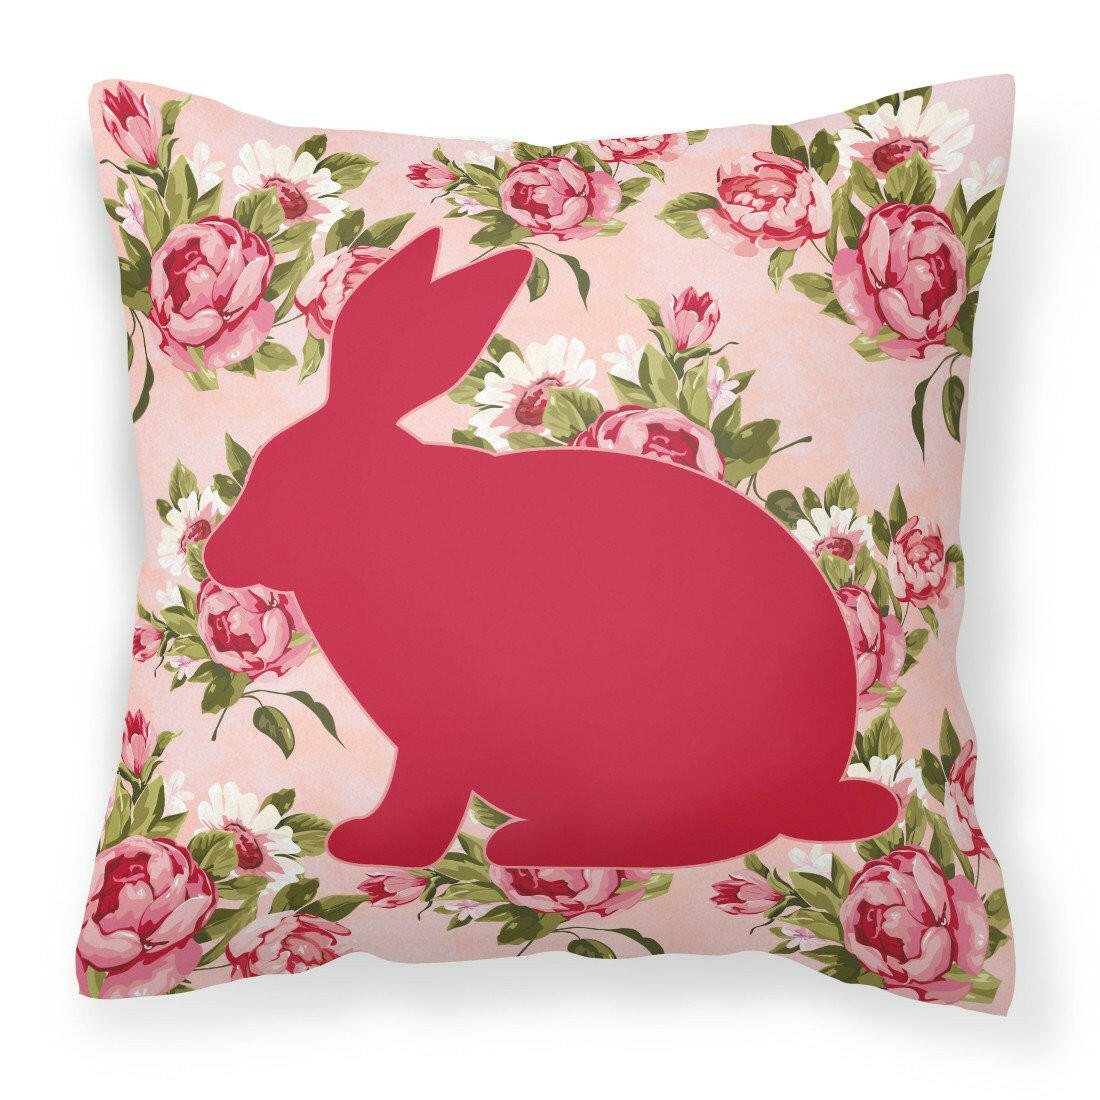 Rabbit Shabby Chic Pink Roses   Fabric Decorative Pillow BB1002-RS-PK-PW1414 - the-store.com